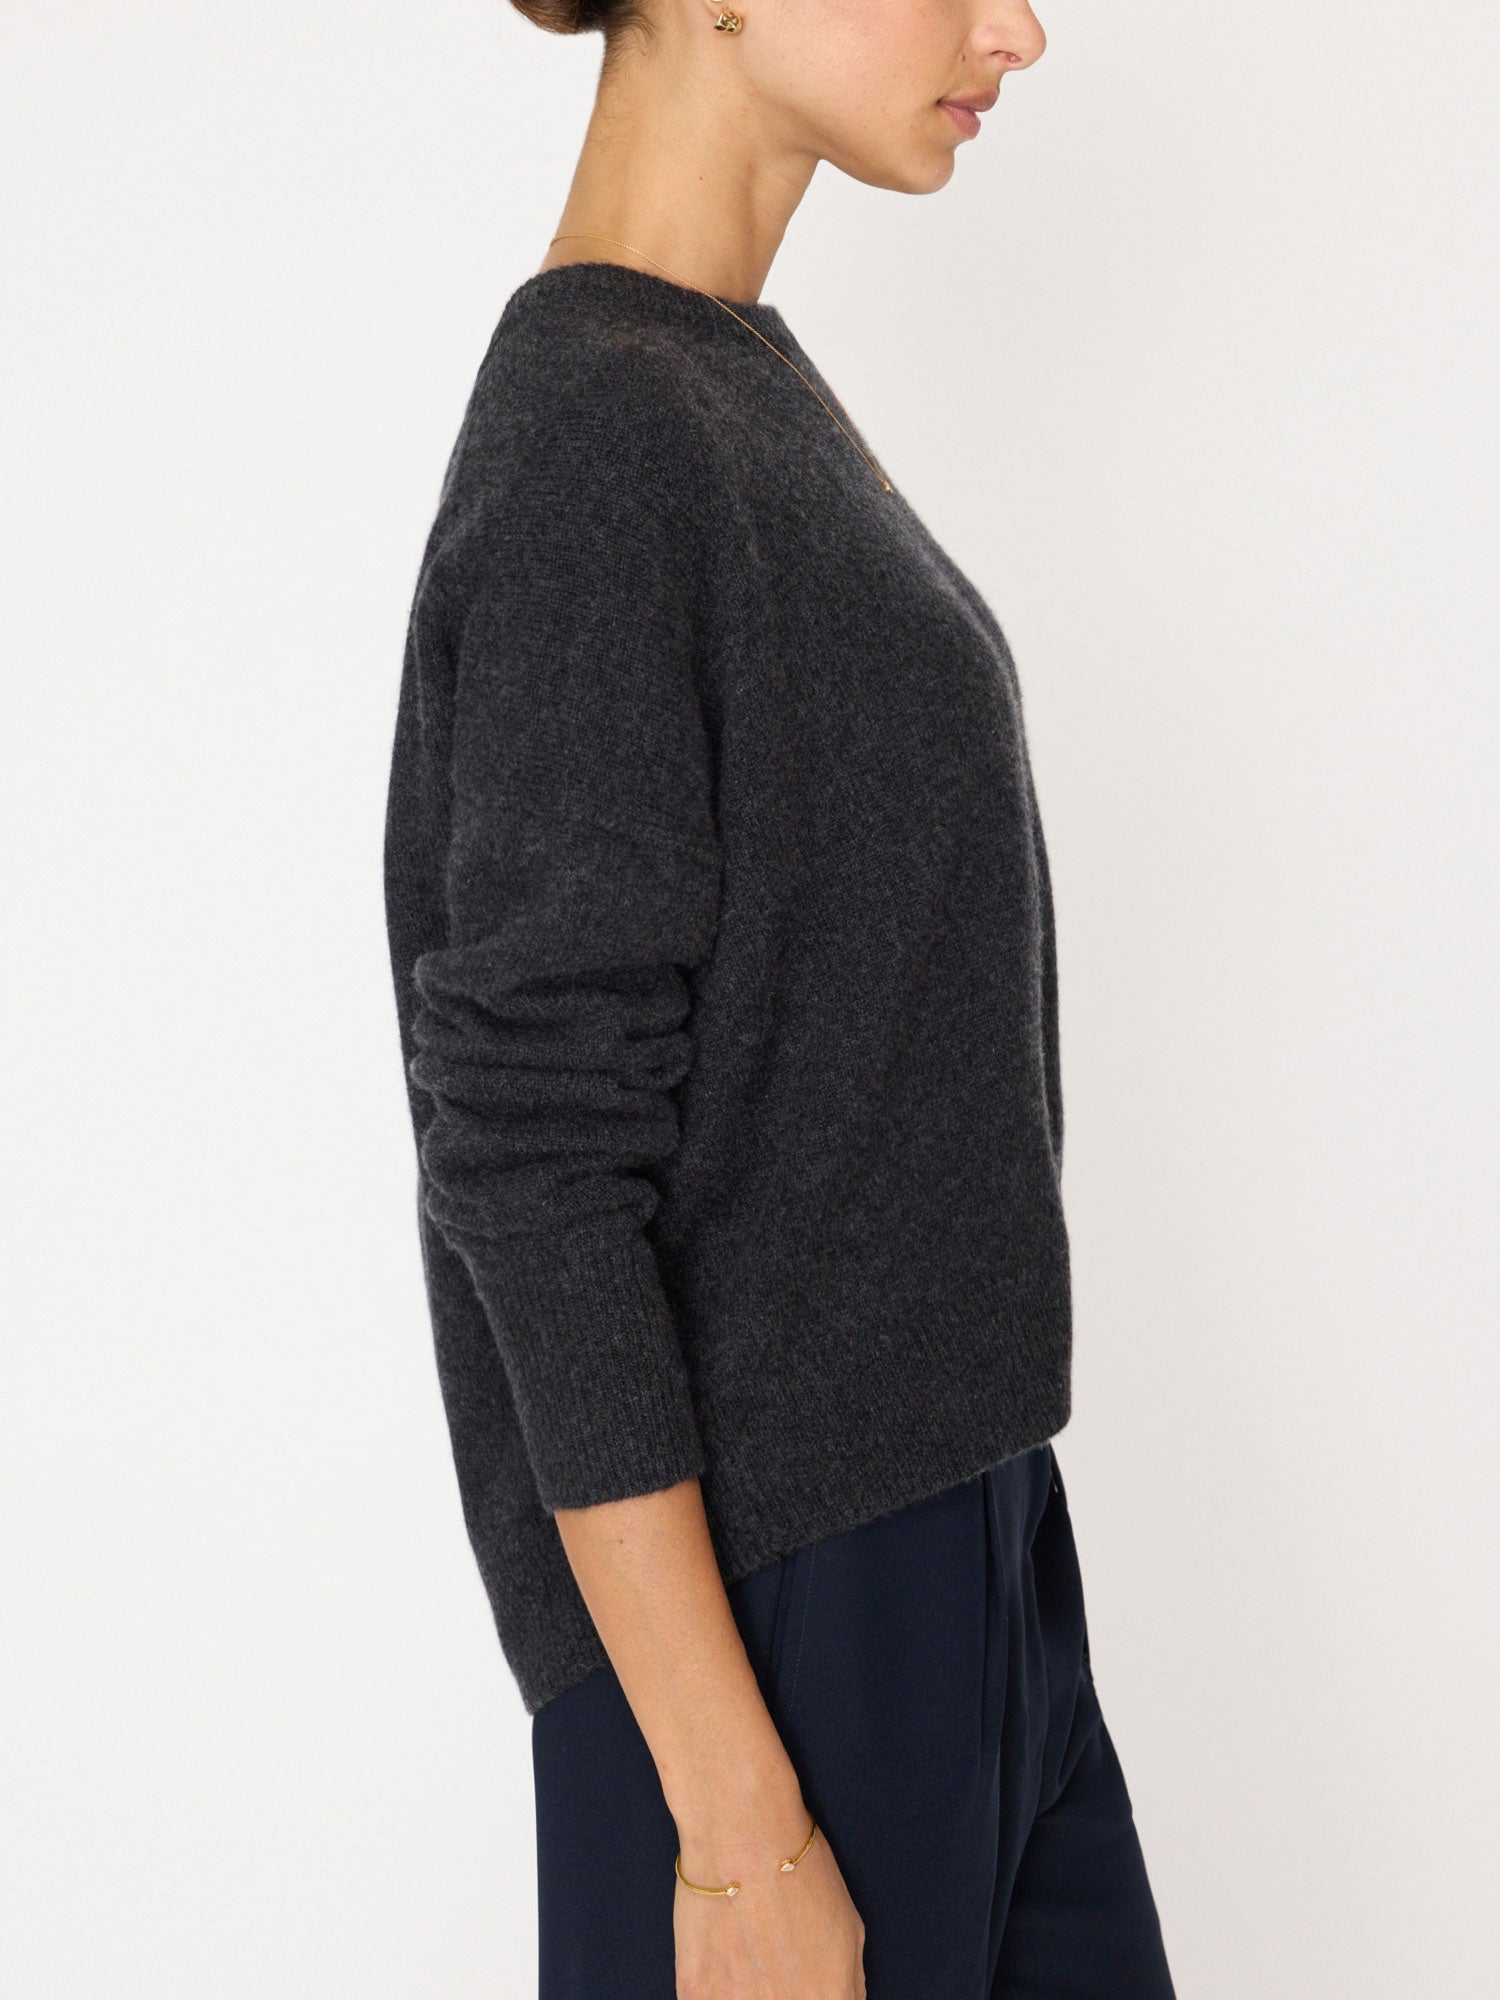 Everyday cashmere crewneck grey sweater side view